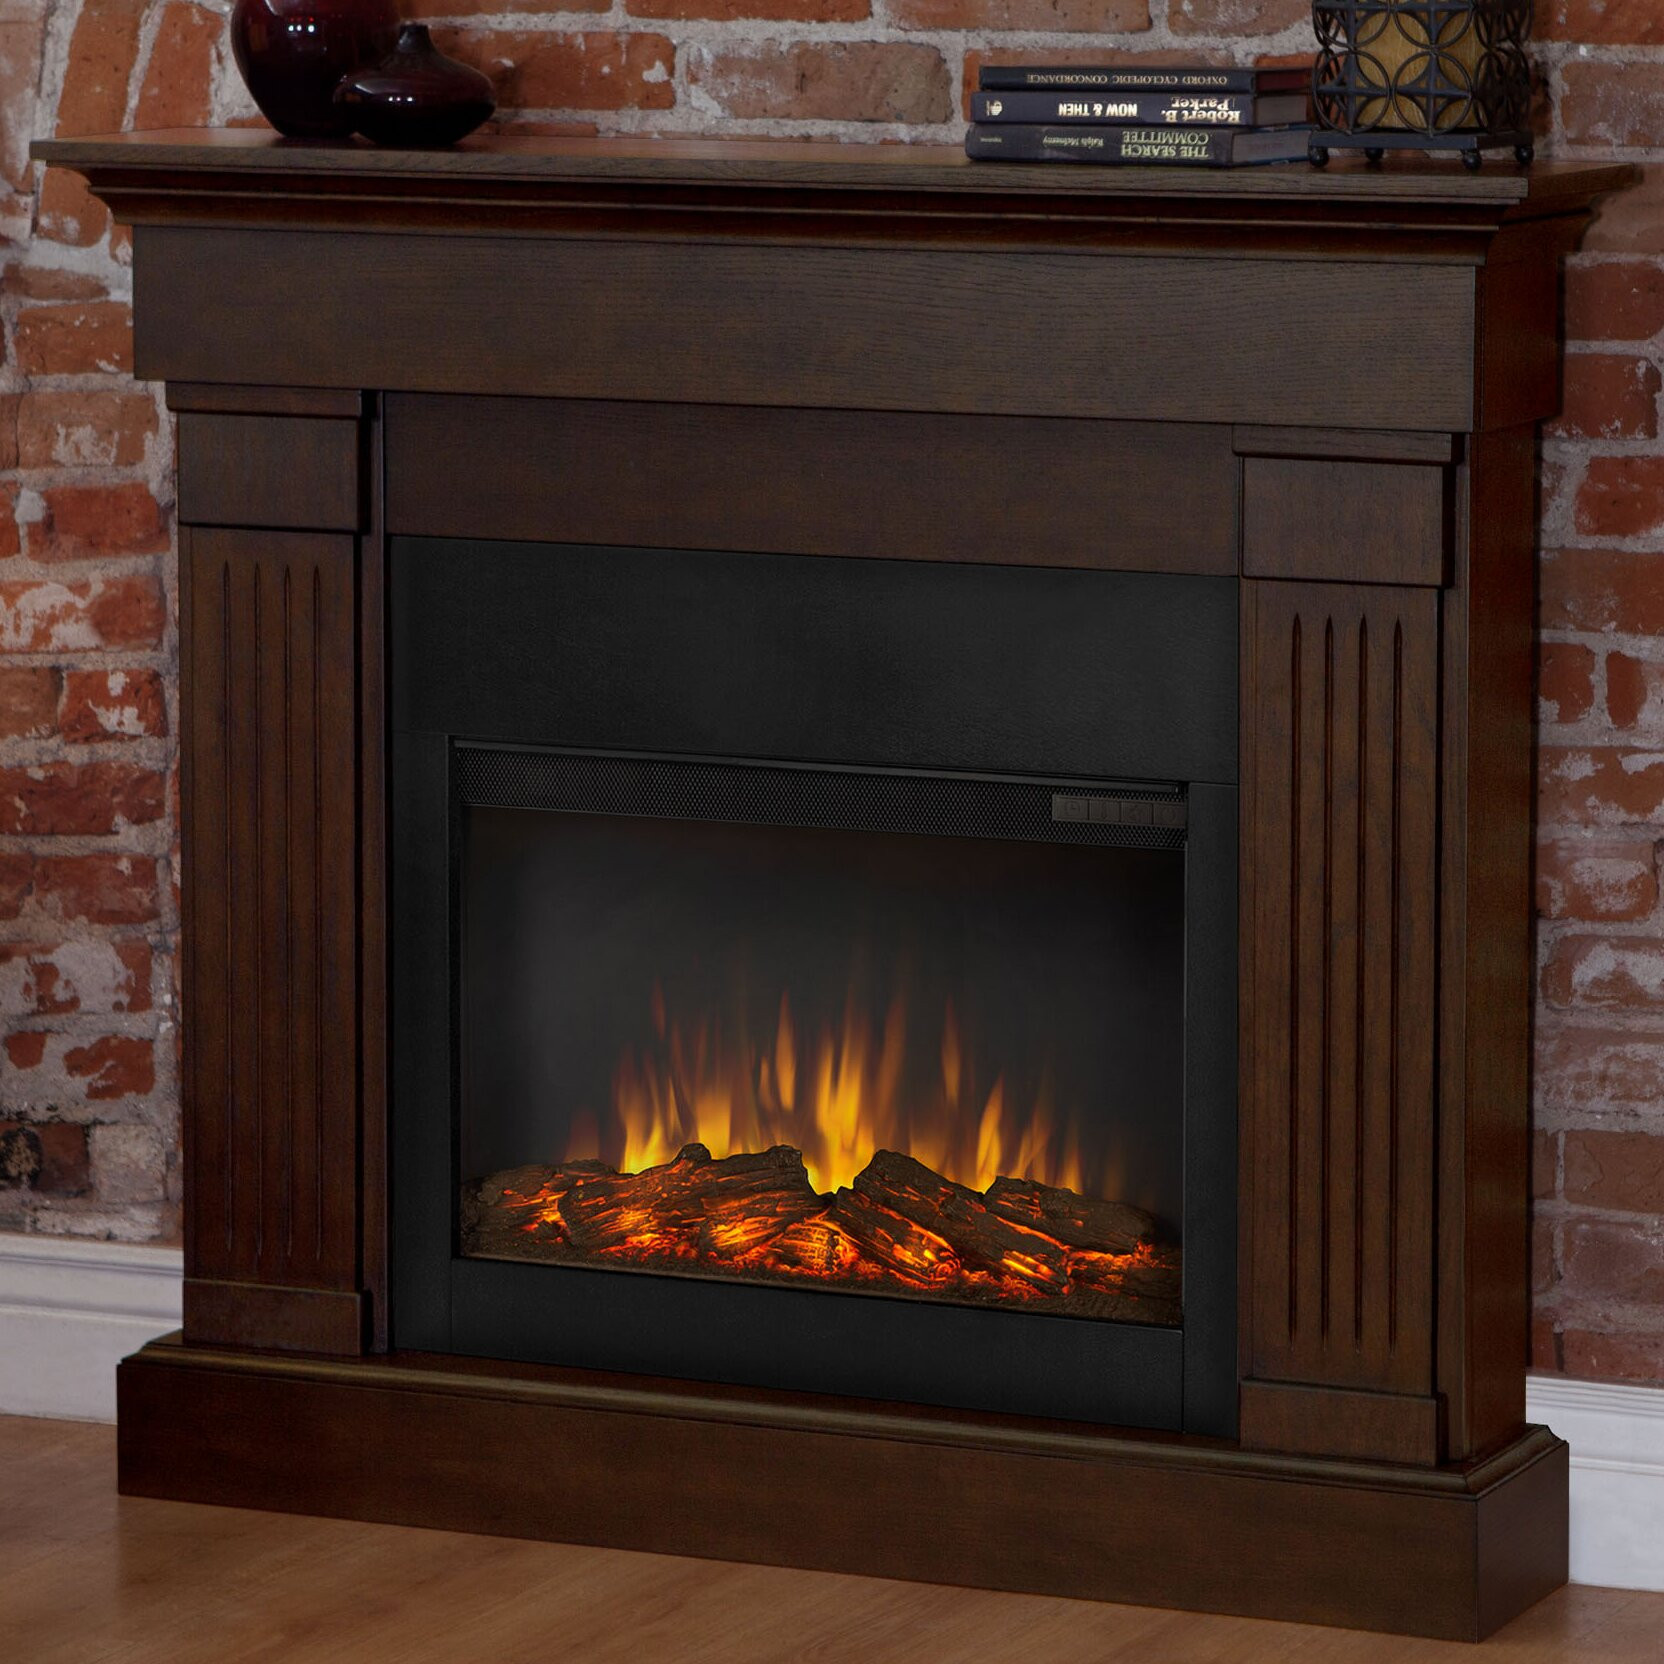 Wall Mounted Fireplace Electric
 Real Flame Slim Crawford Wall Mounted Electric Fireplace